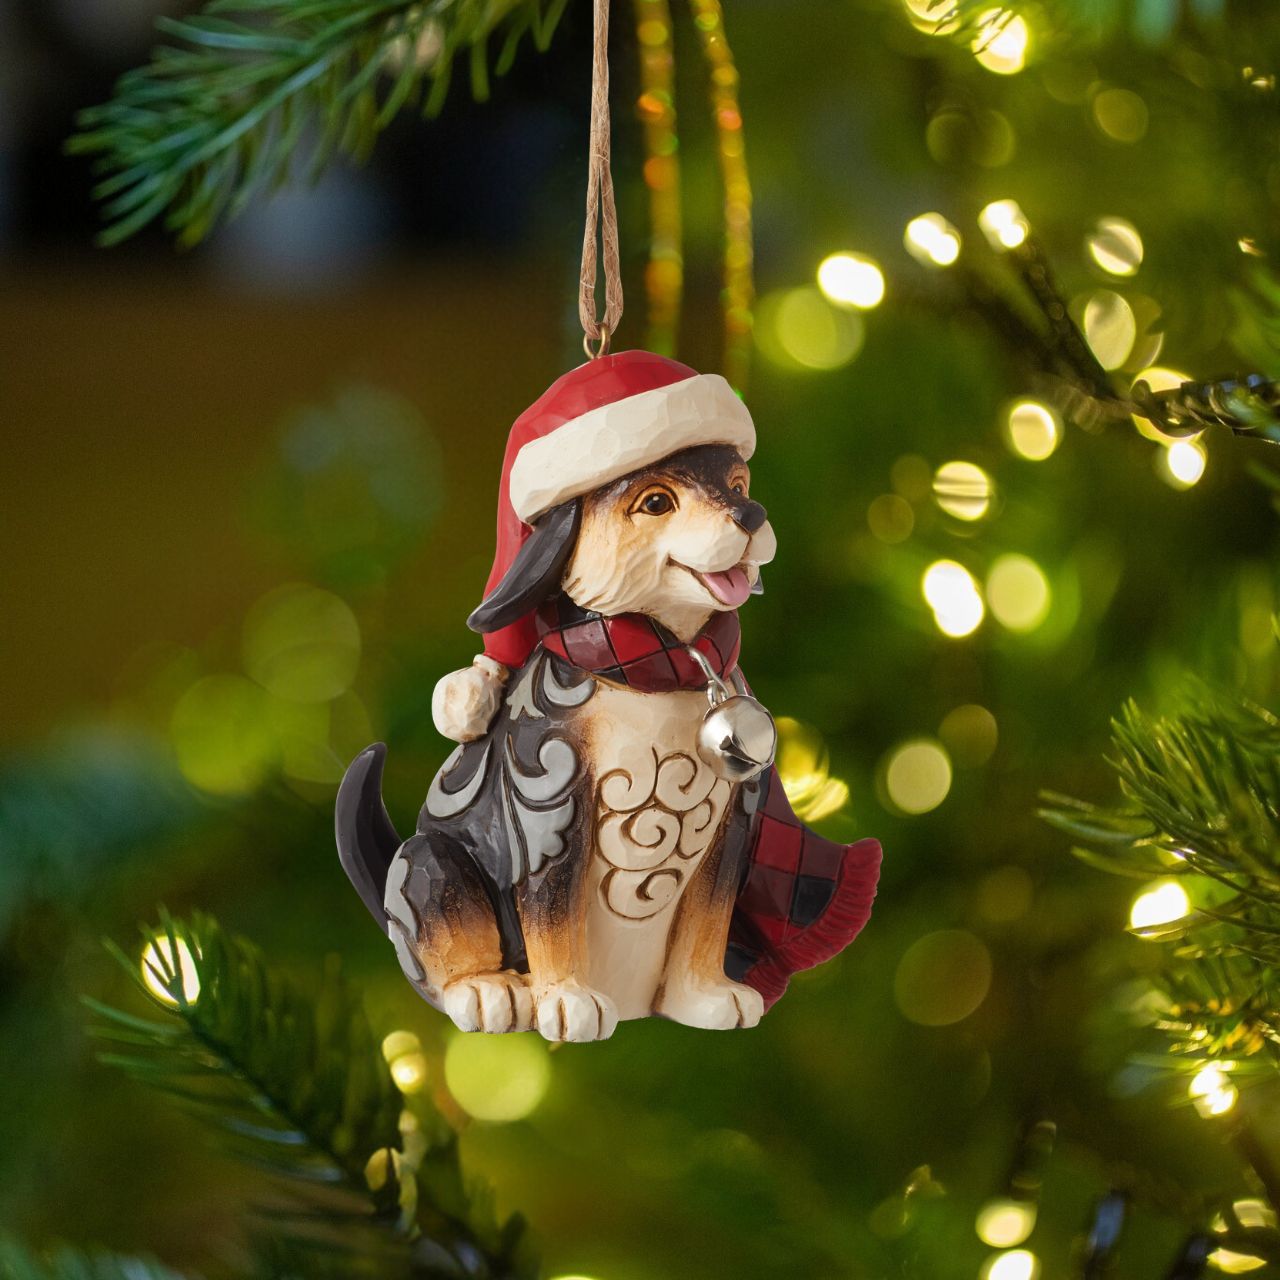 Heartwood Creek Highland Glen Dog in Scarf Hanging Ornament  Designed by award winning artist Jim Shore as part of the Heartwood Creek Highland Glen Collection, hand crafted using high quality cast stone and hand painted, this cute dog hanging ornament is perfect for the Christmas season. Packaging: Full colour, fully branded gift box with photo.